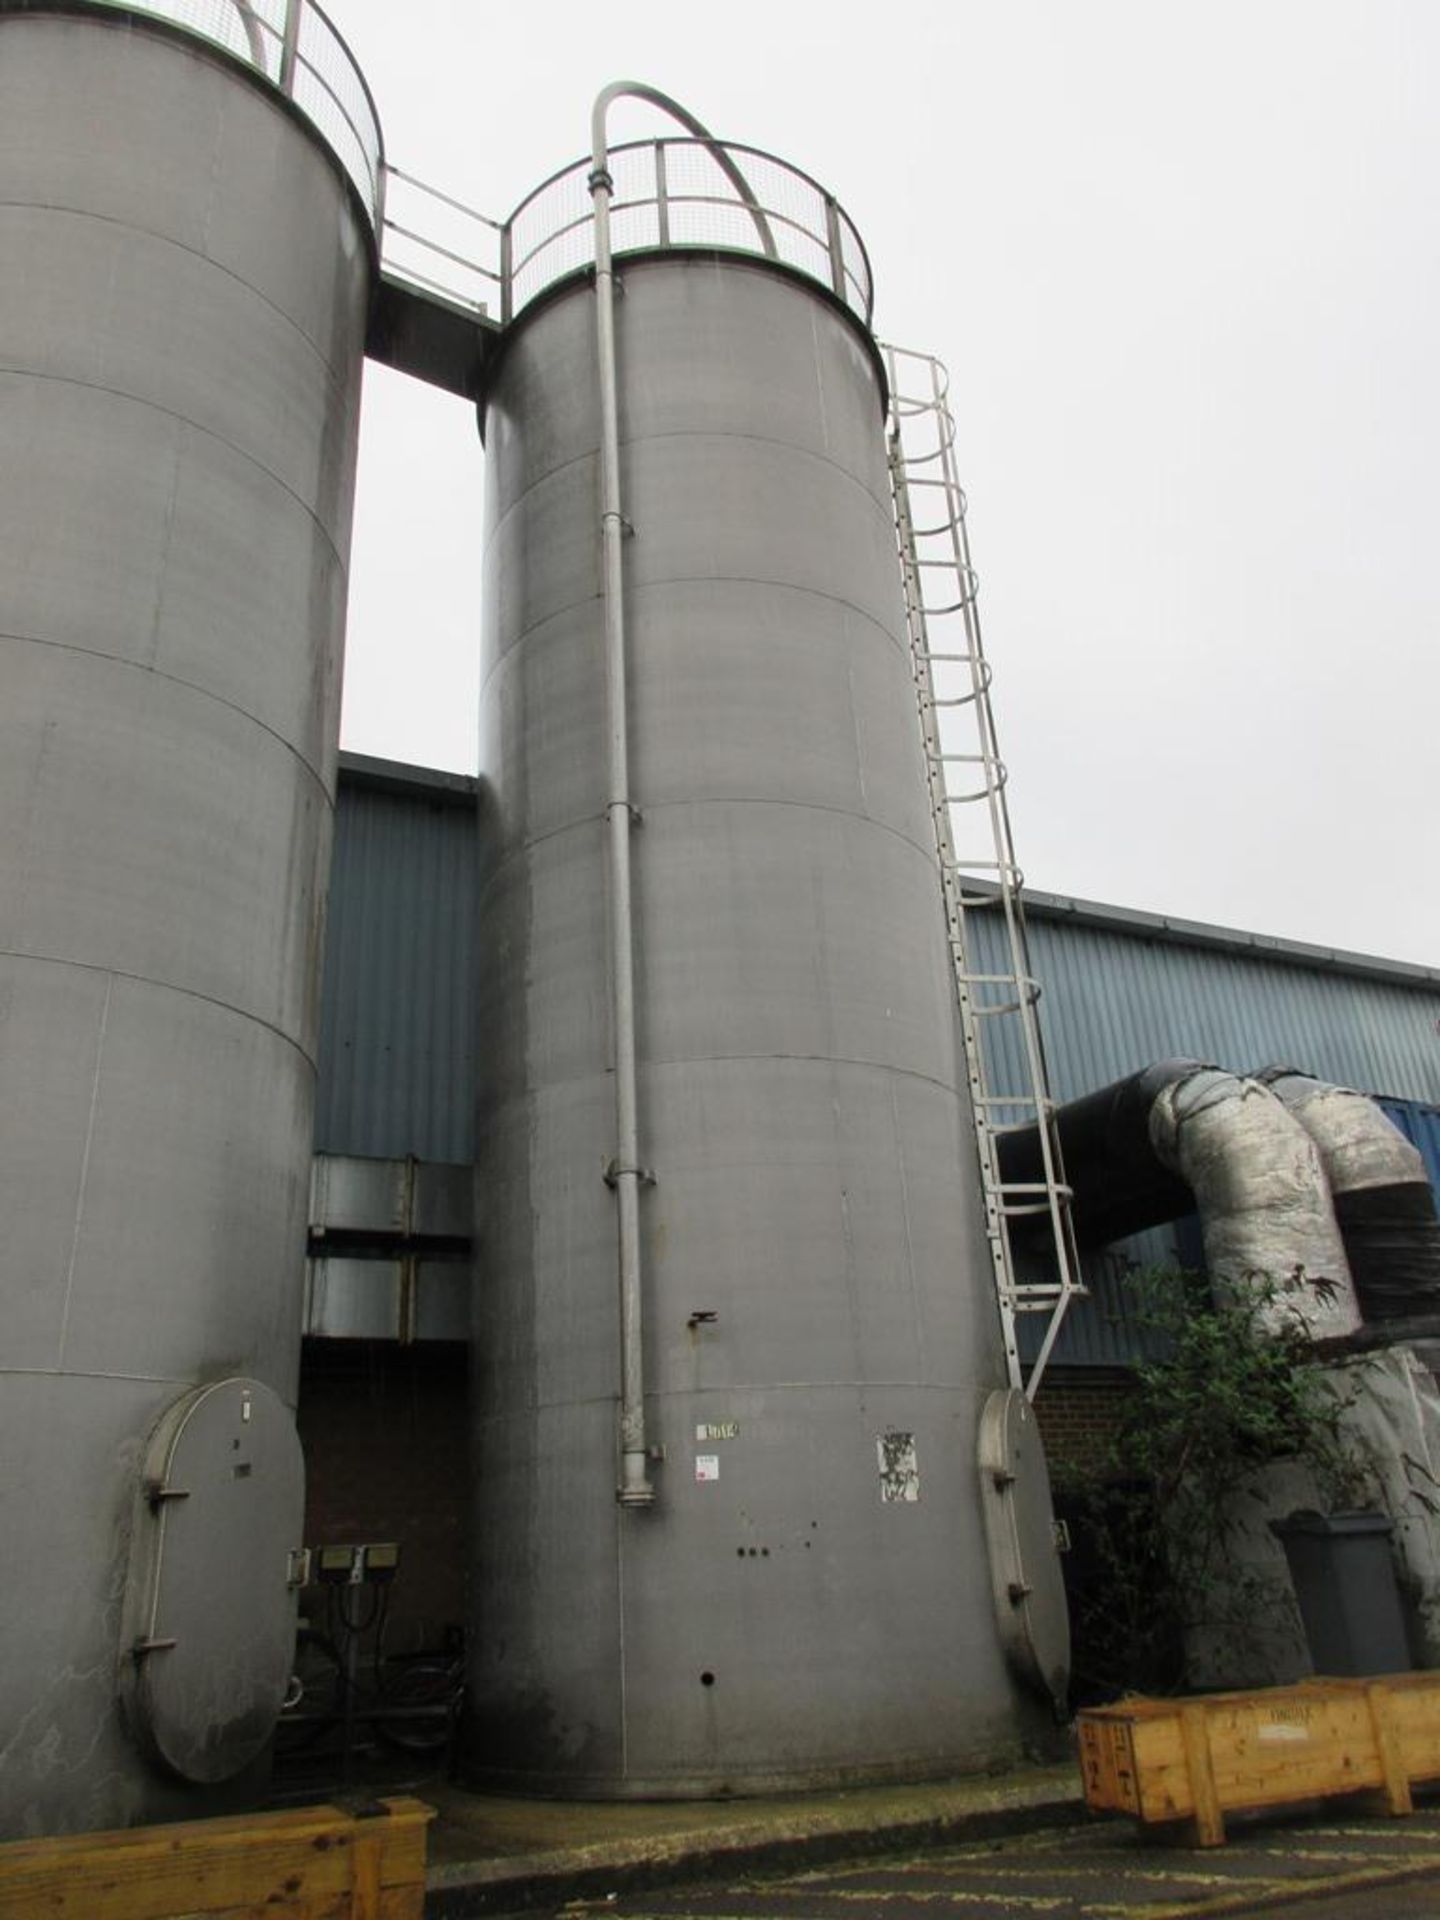 Aluminium single skin vertical silo, capacity 25ton A work Method Statement and Risk Assessment must